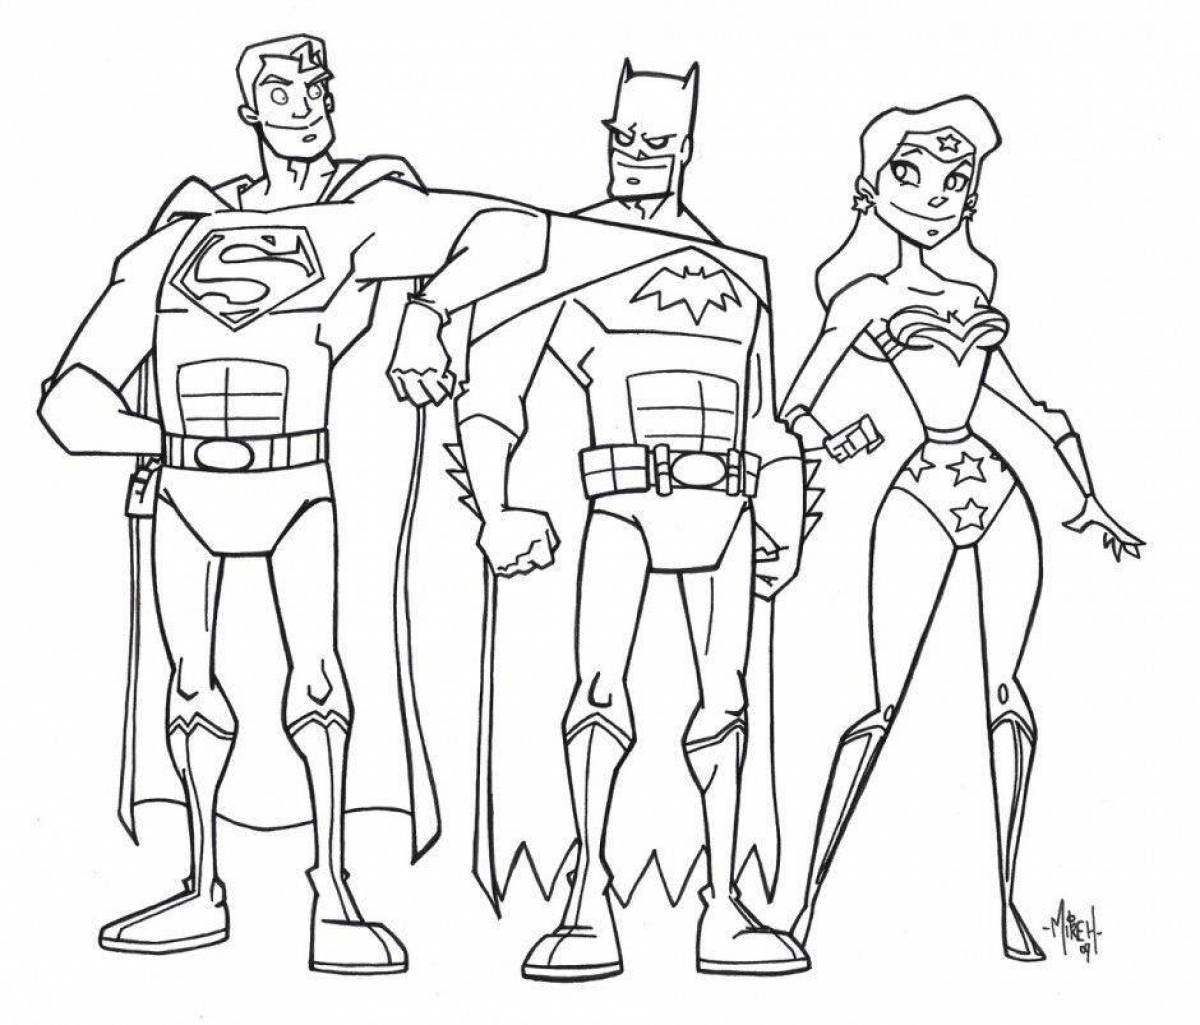 Funny superheroes coloring pages for kids